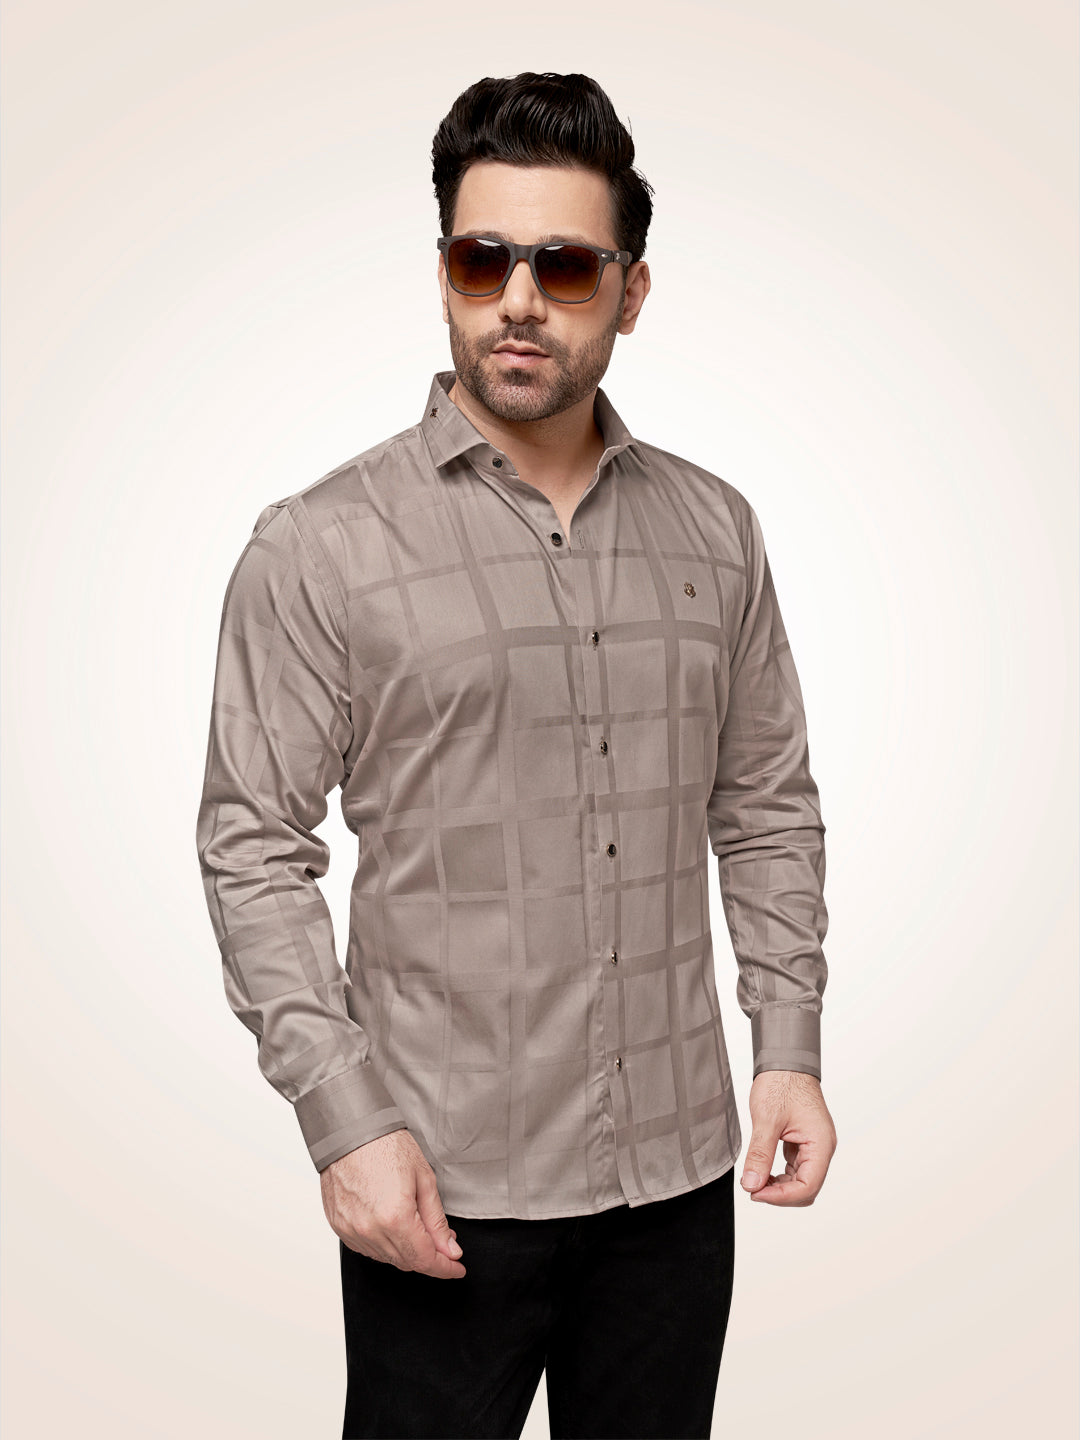 Black and White Self Checks Cocktail Shirt- Premium 60s CountsSelf Checks Cocktail Shirt- Premium 60s Counts Camel